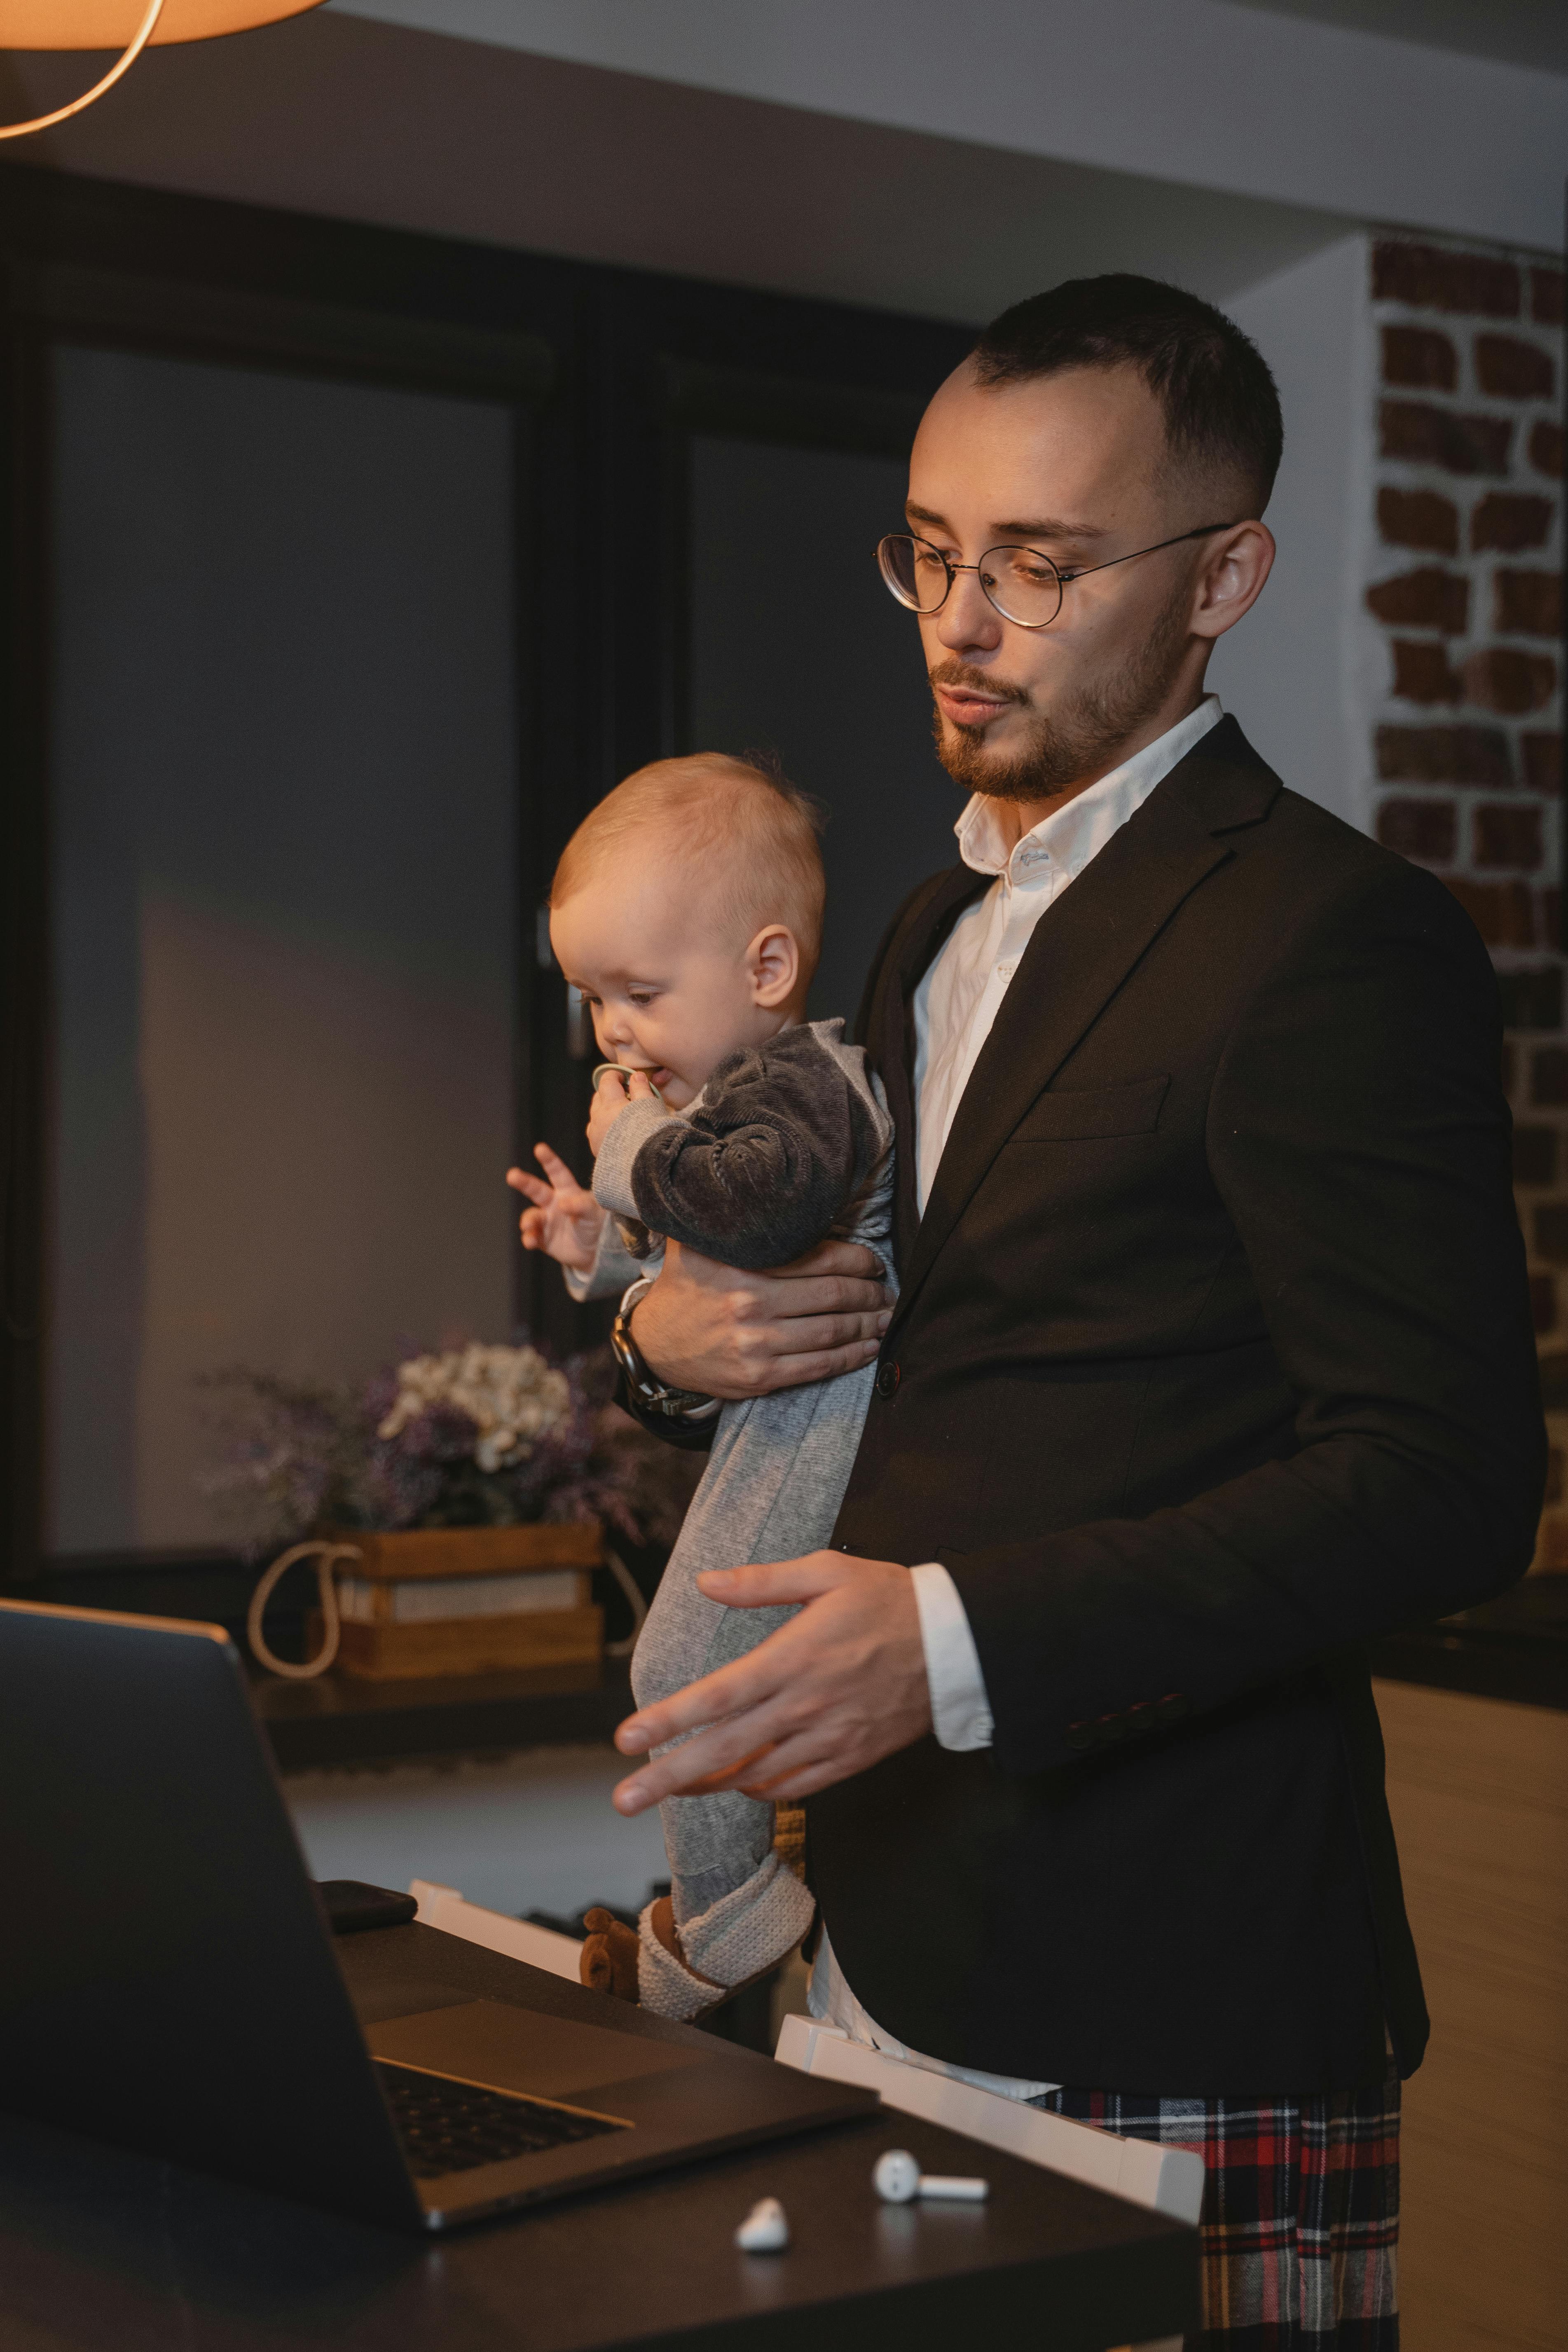 A father carrying a baby while on his laptop | Source: Pexels